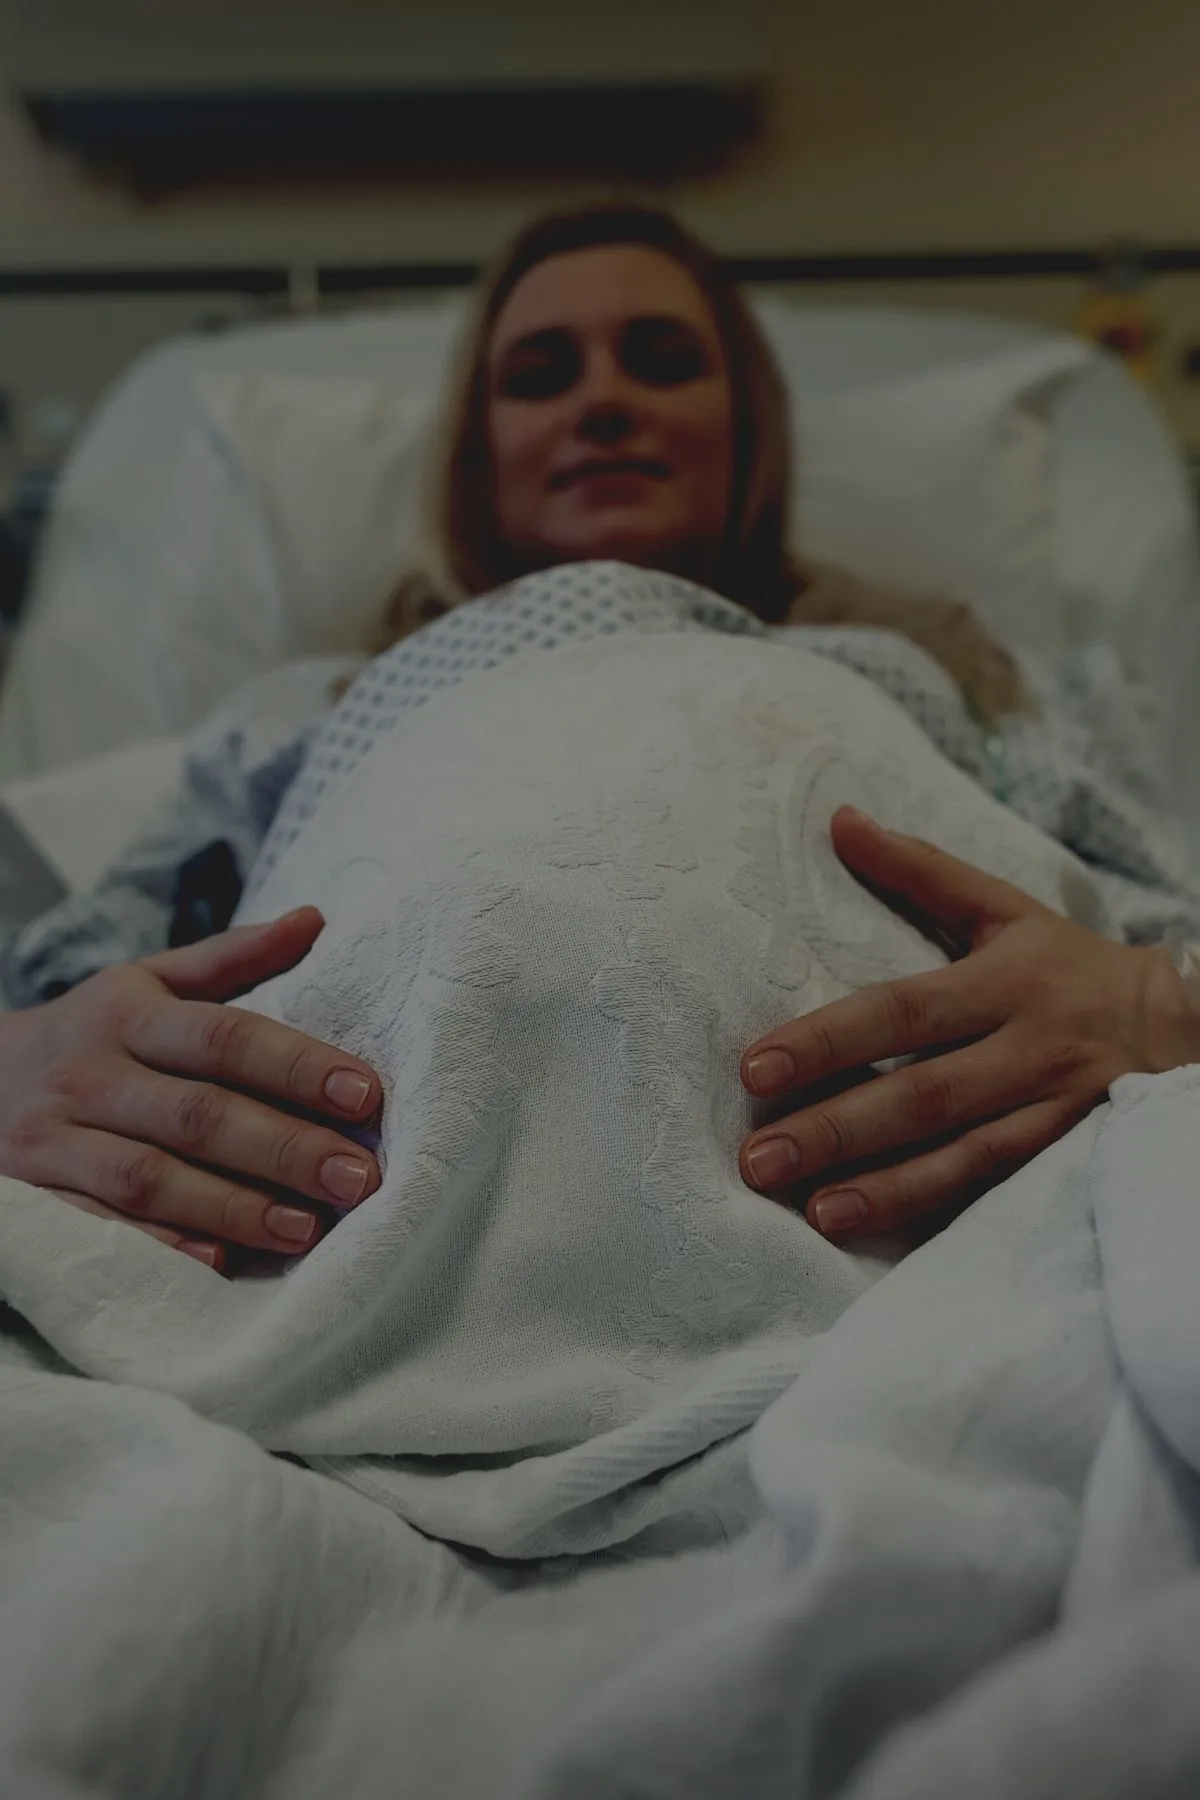 Pregnant woman prepares for birth on hospital bed in dimmed delivery room.